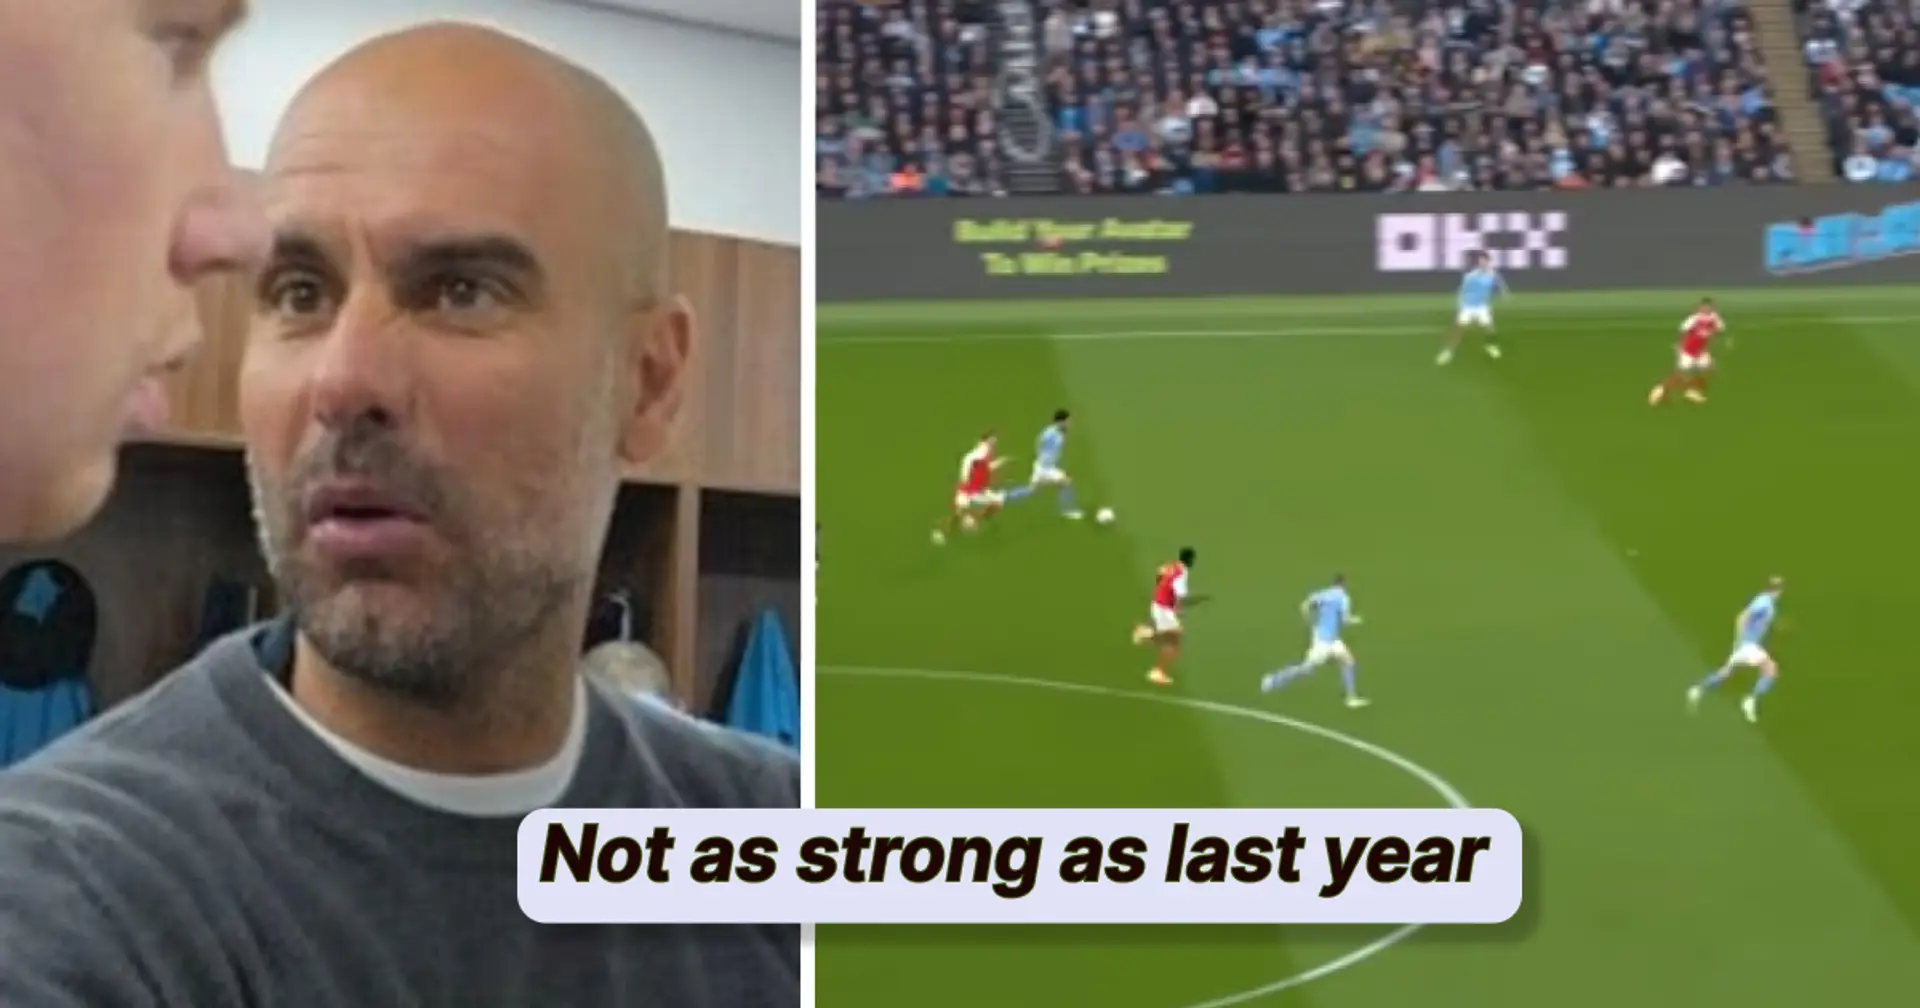 Real Madrid fan reveals what he has learned from watching Man City's last 3 games